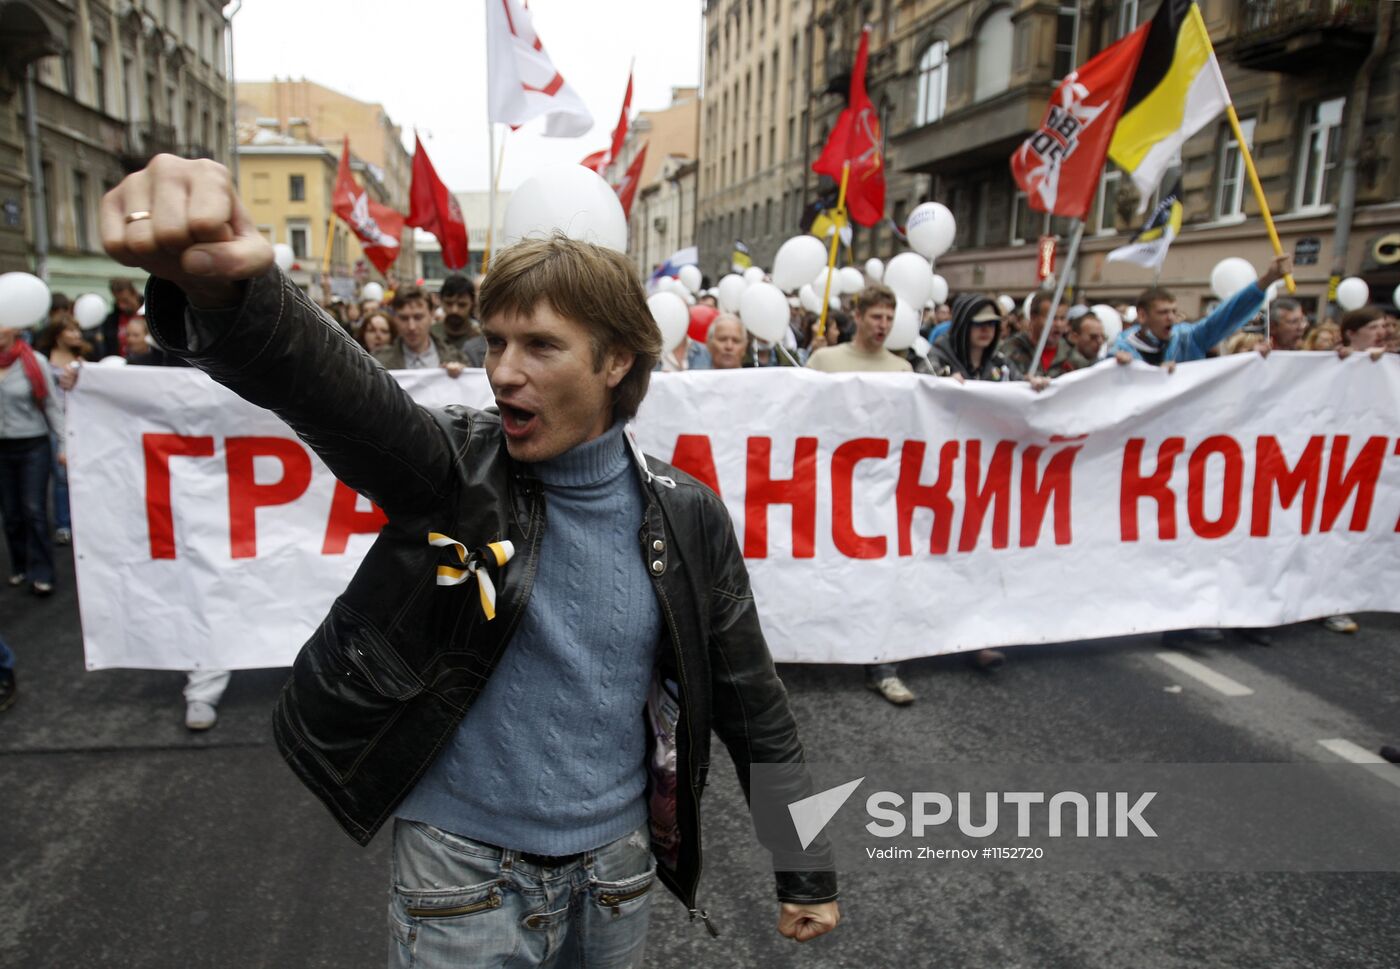 March of Millions opposition rally in Moscow